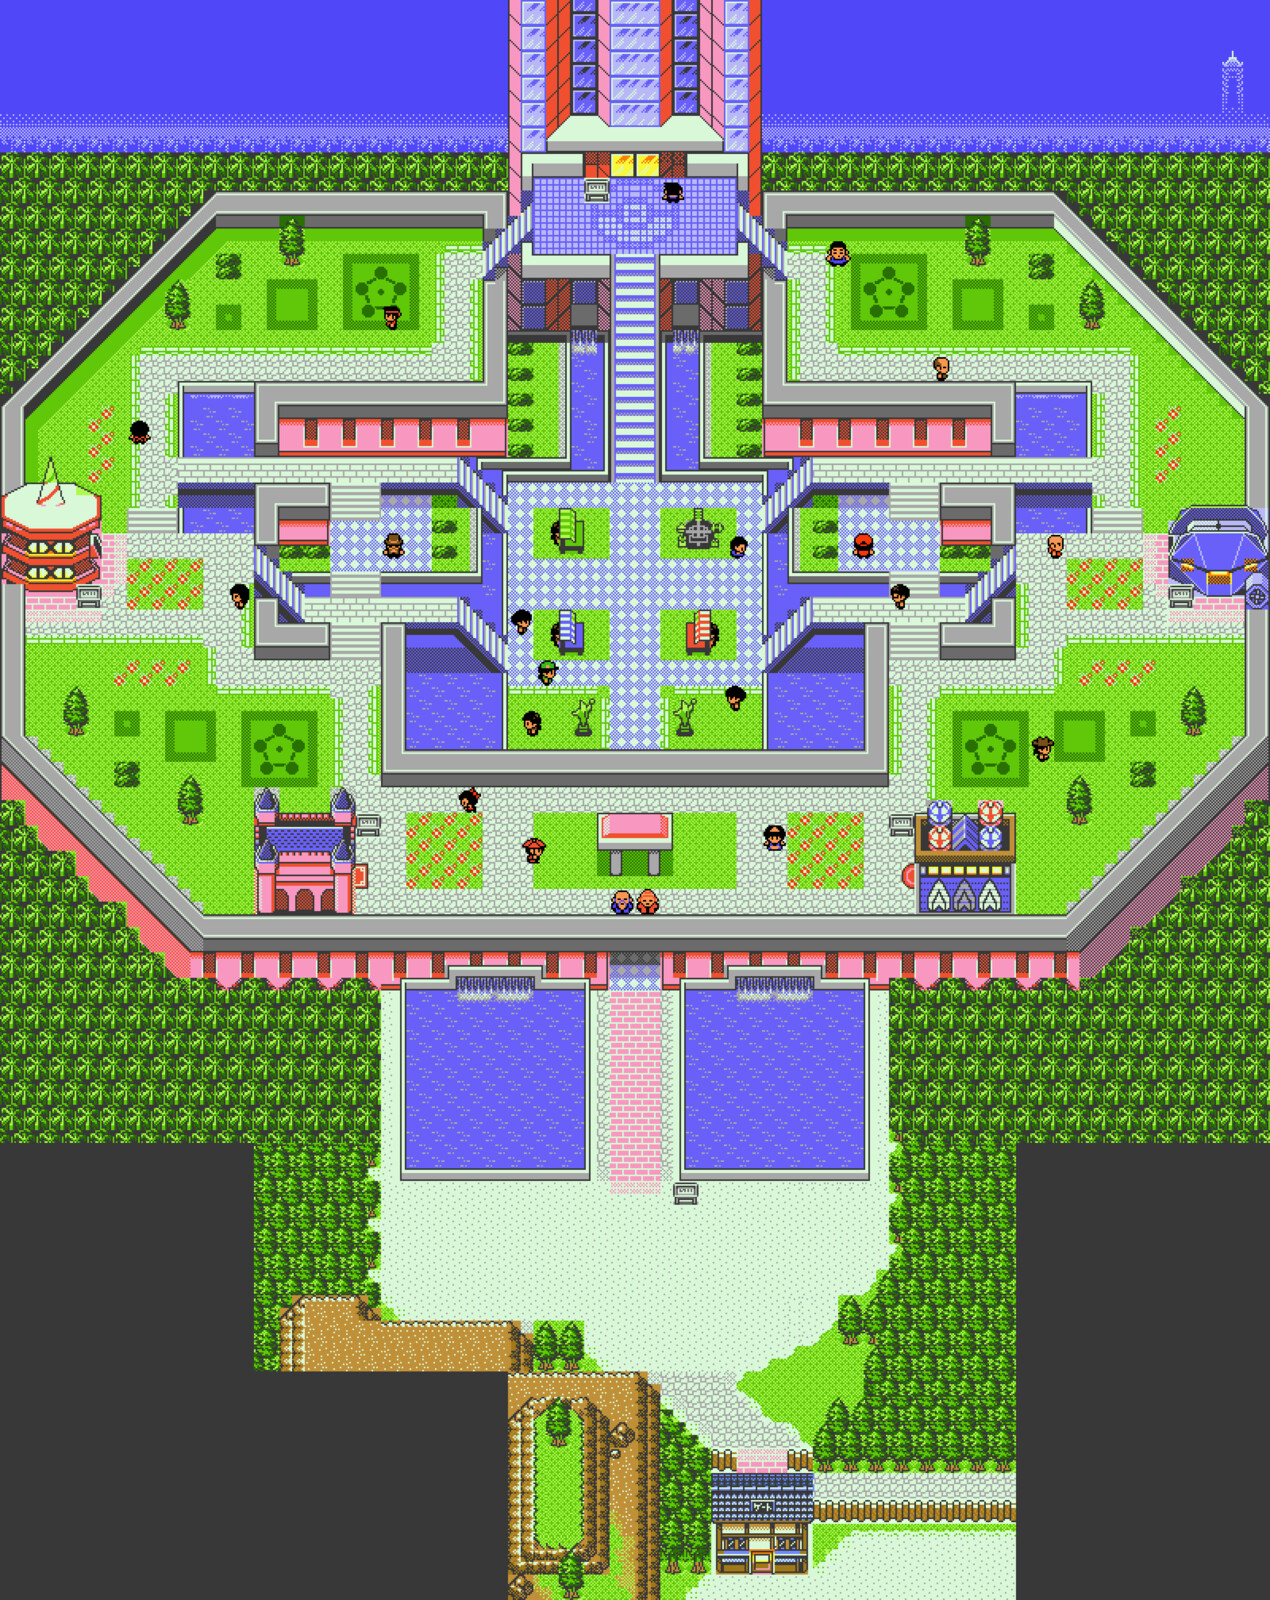 Battle Frontier, HGSS style.
I had to rescale and simplify certain aspects of this area so that it could fit into the rest of the map.